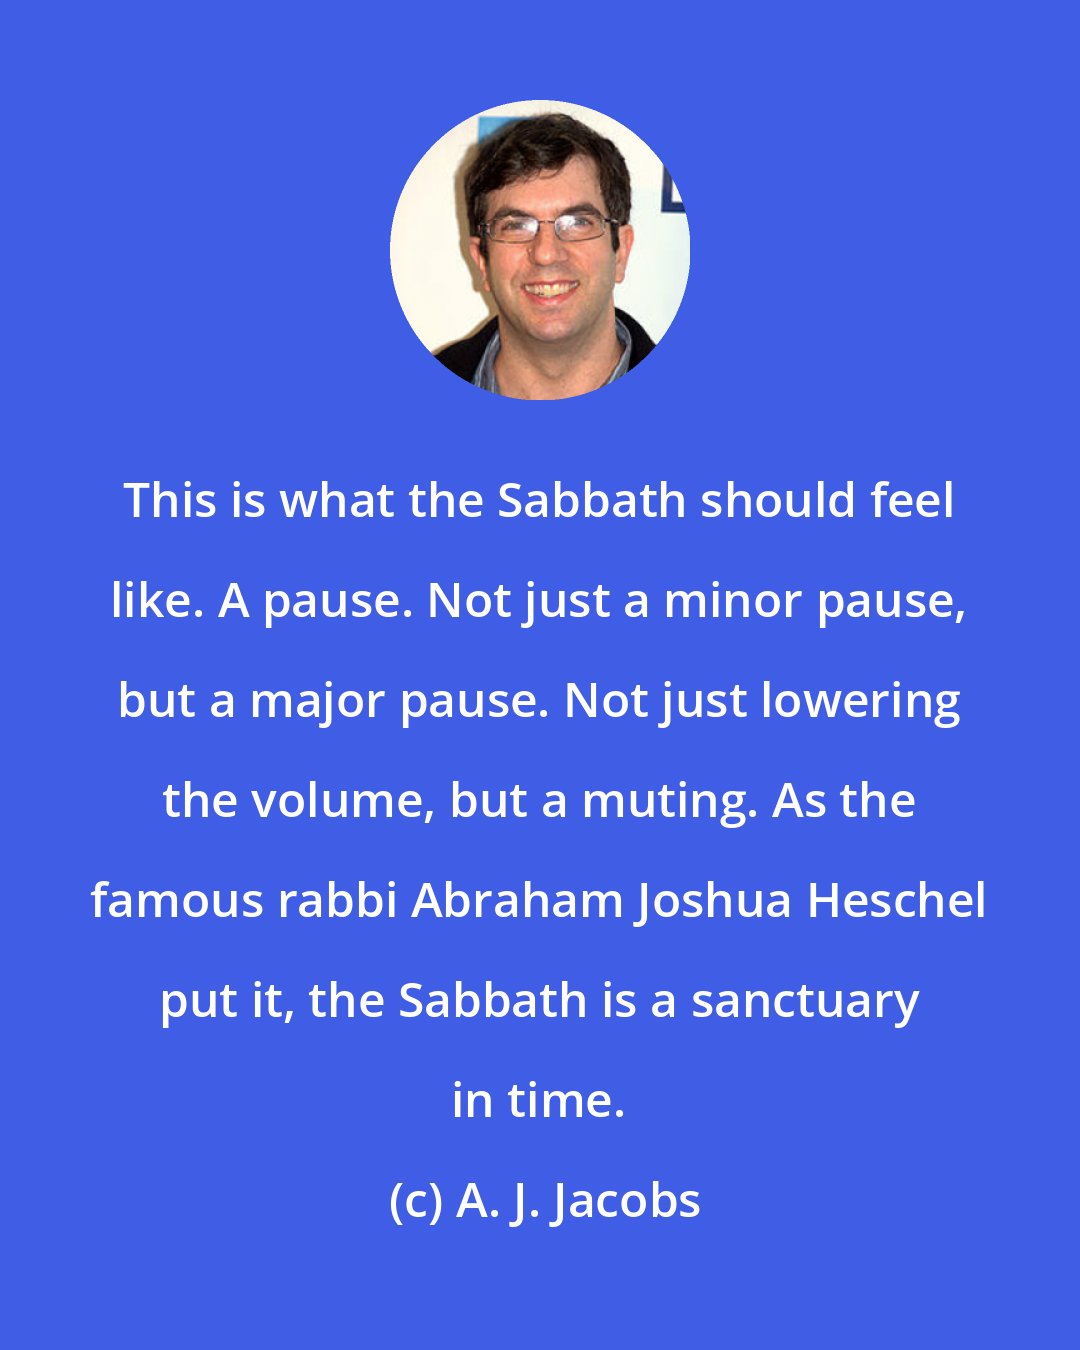 A. J. Jacobs: This is what the Sabbath should feel like. A pause. Not just a minor pause, but a major pause. Not just lowering the volume, but a muting. As the famous rabbi Abraham Joshua Heschel put it, the Sabbath is a sanctuary in time.